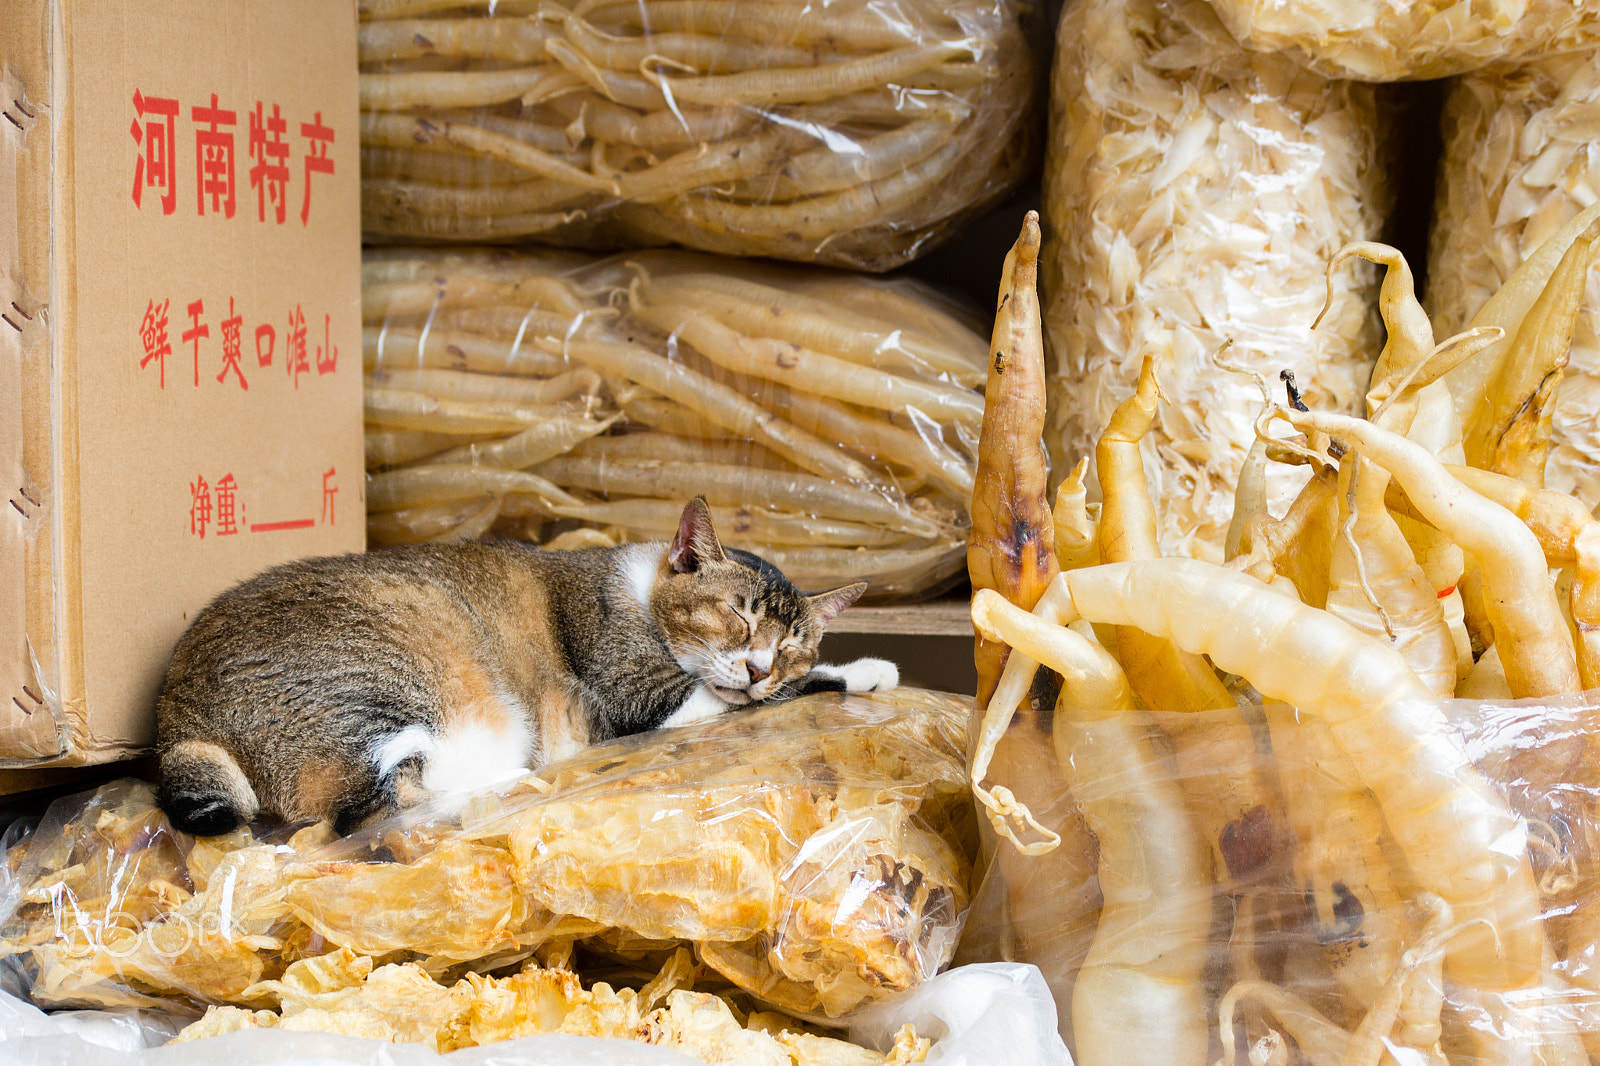 Nikon D7100 sample photo. Sleeping cat surrounded by dried fish photography